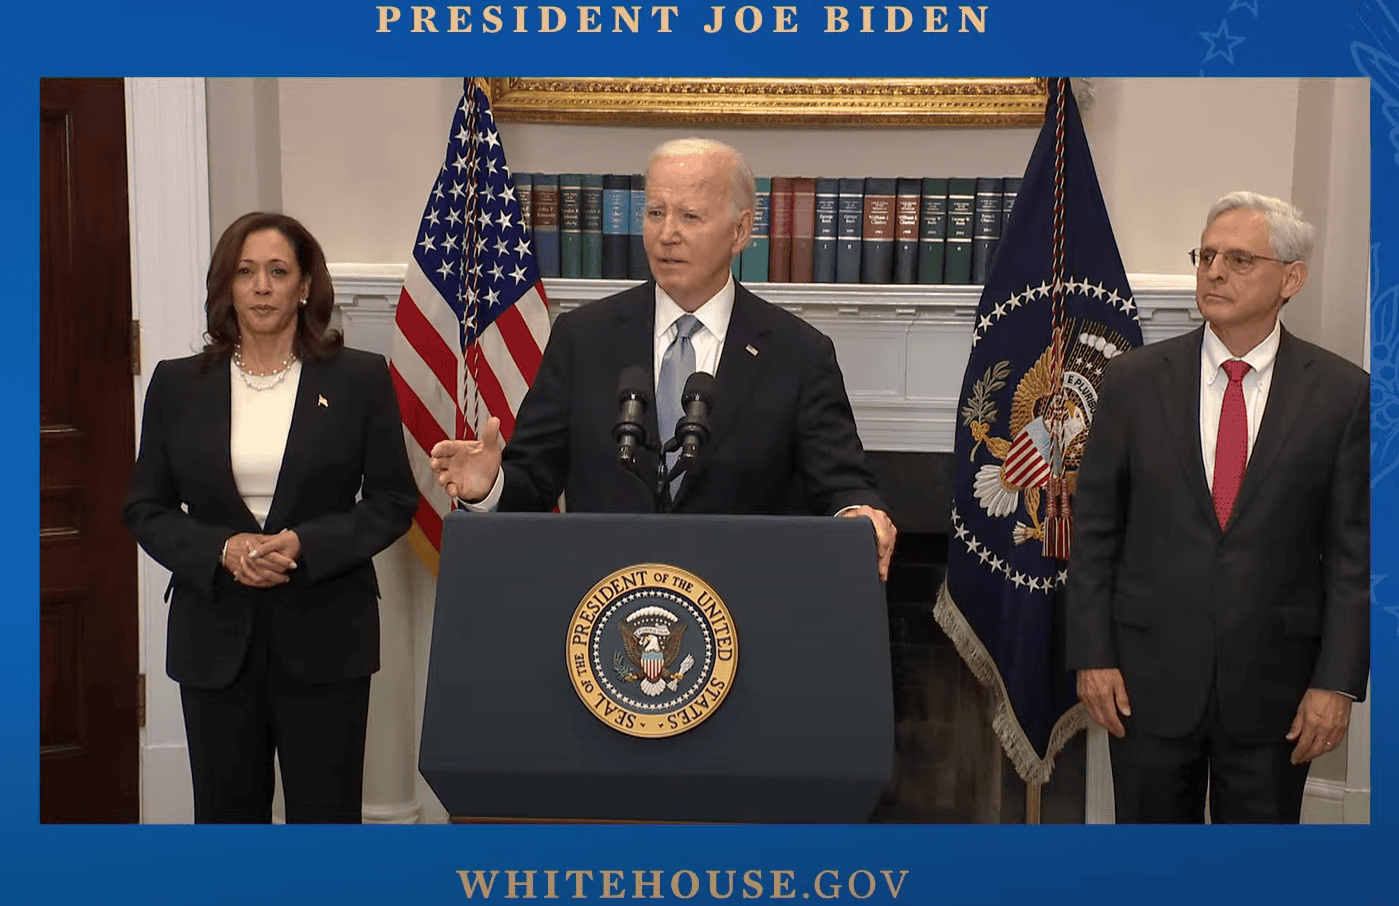 President Biden calling for a reduction in violence.